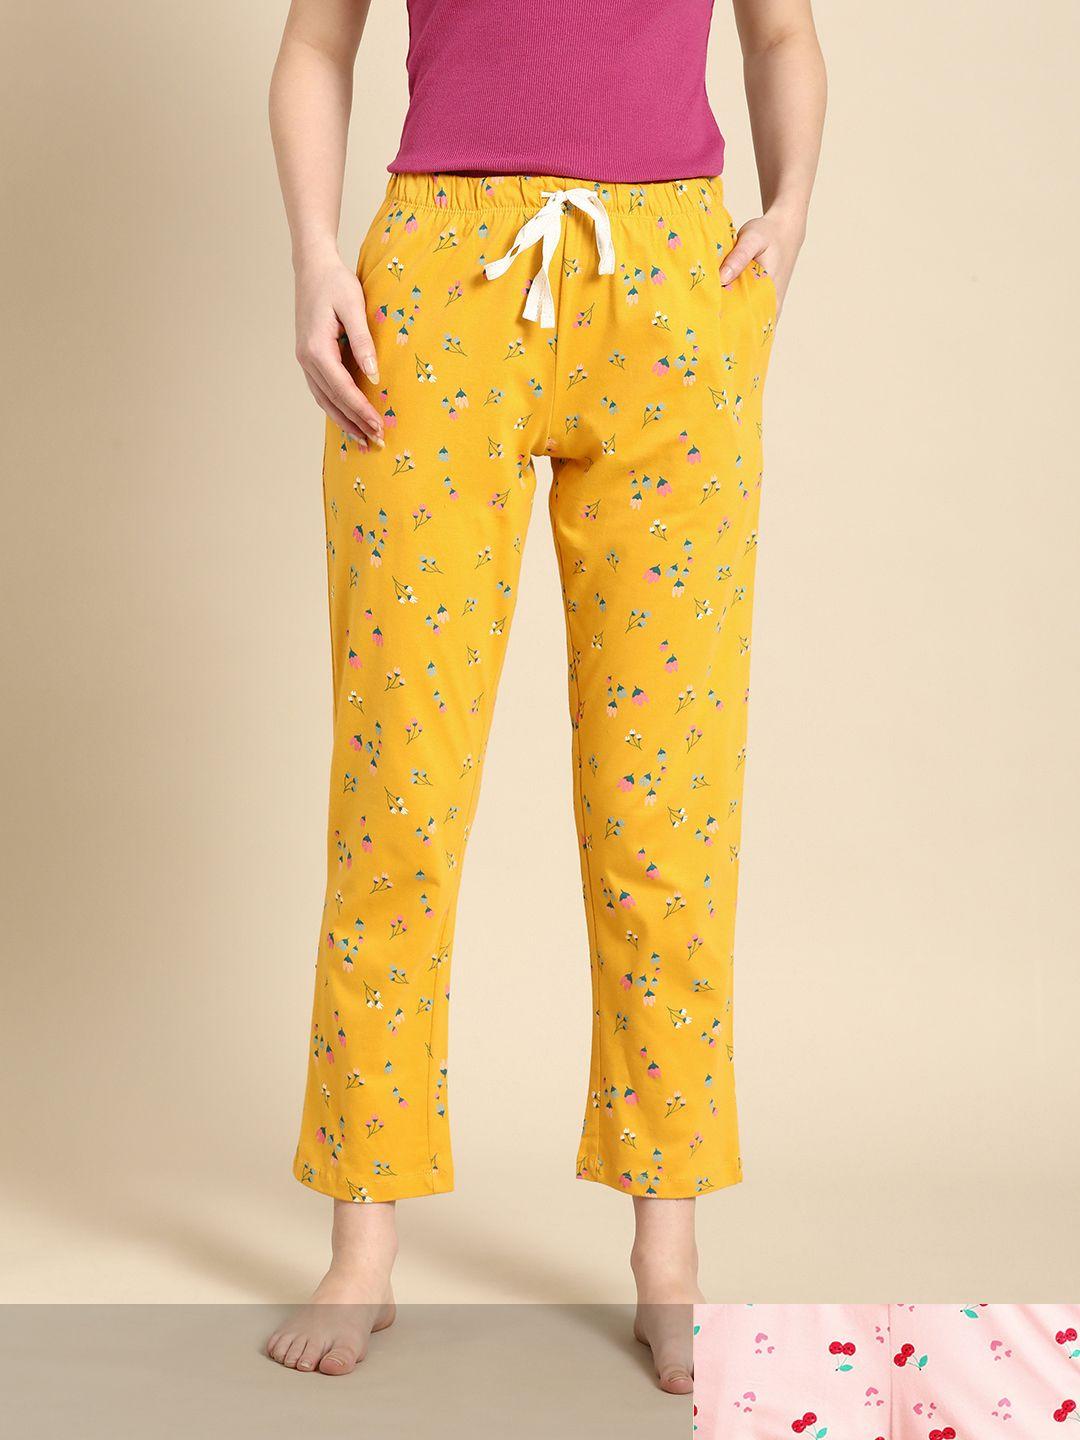 dreamz by pantaloons women pack of 2 printed pure cotton lounge pants in yellow & pink